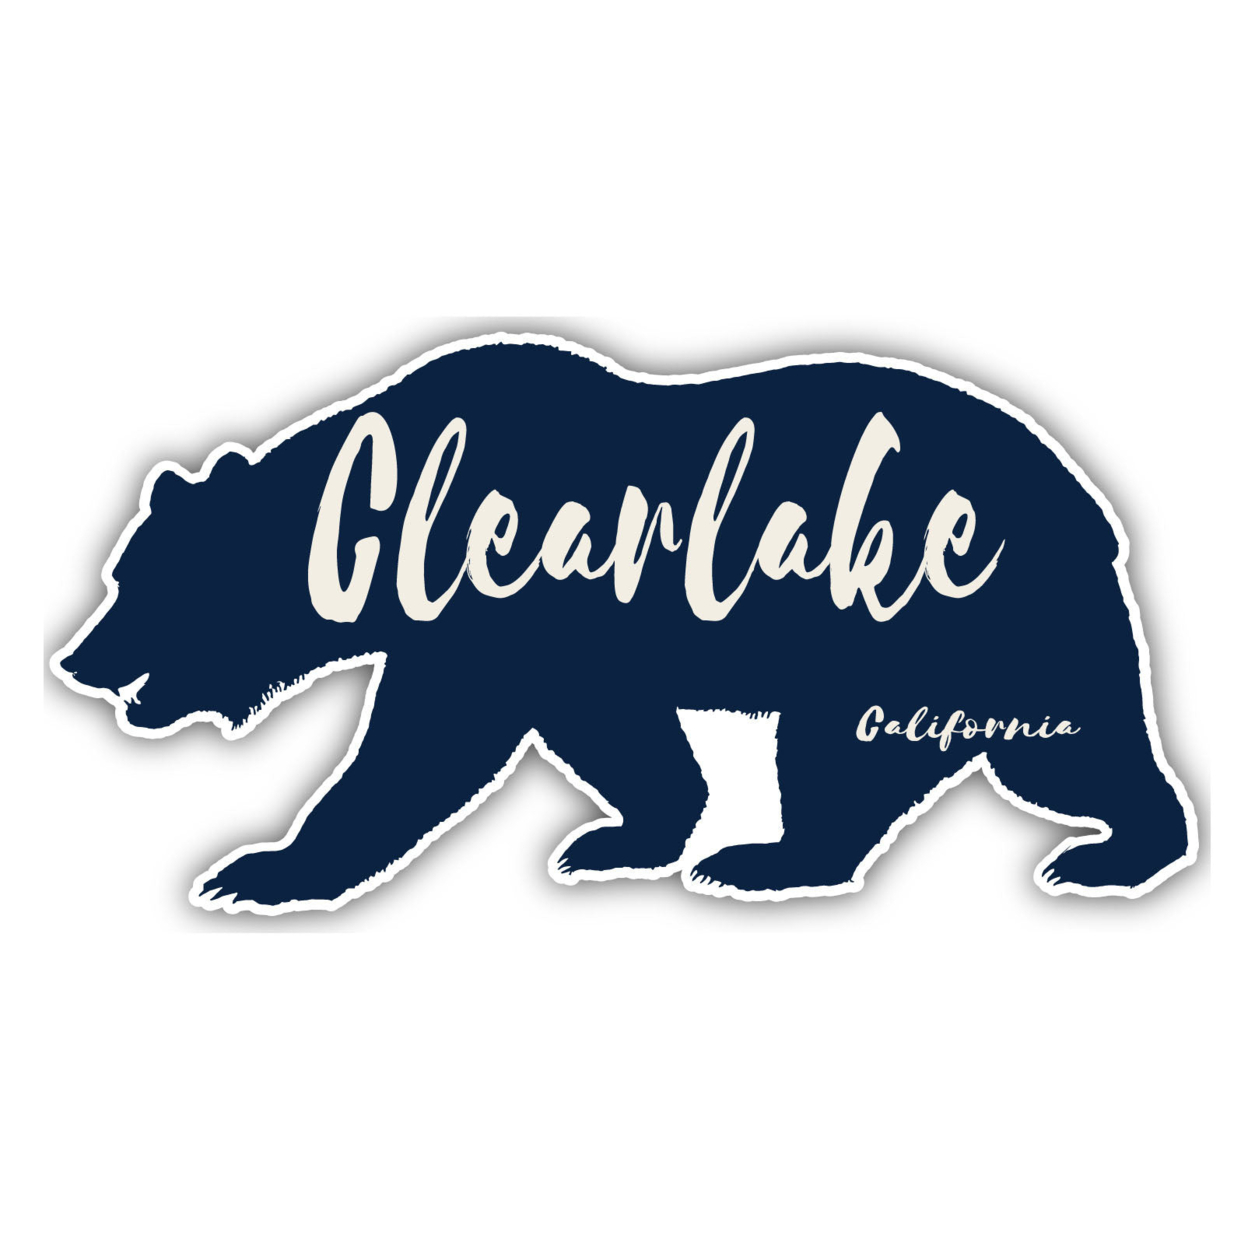 Clearlake California Souvenir Decorative Stickers (Choose Theme And Size) - 4-Pack, 10-Inch, Tent